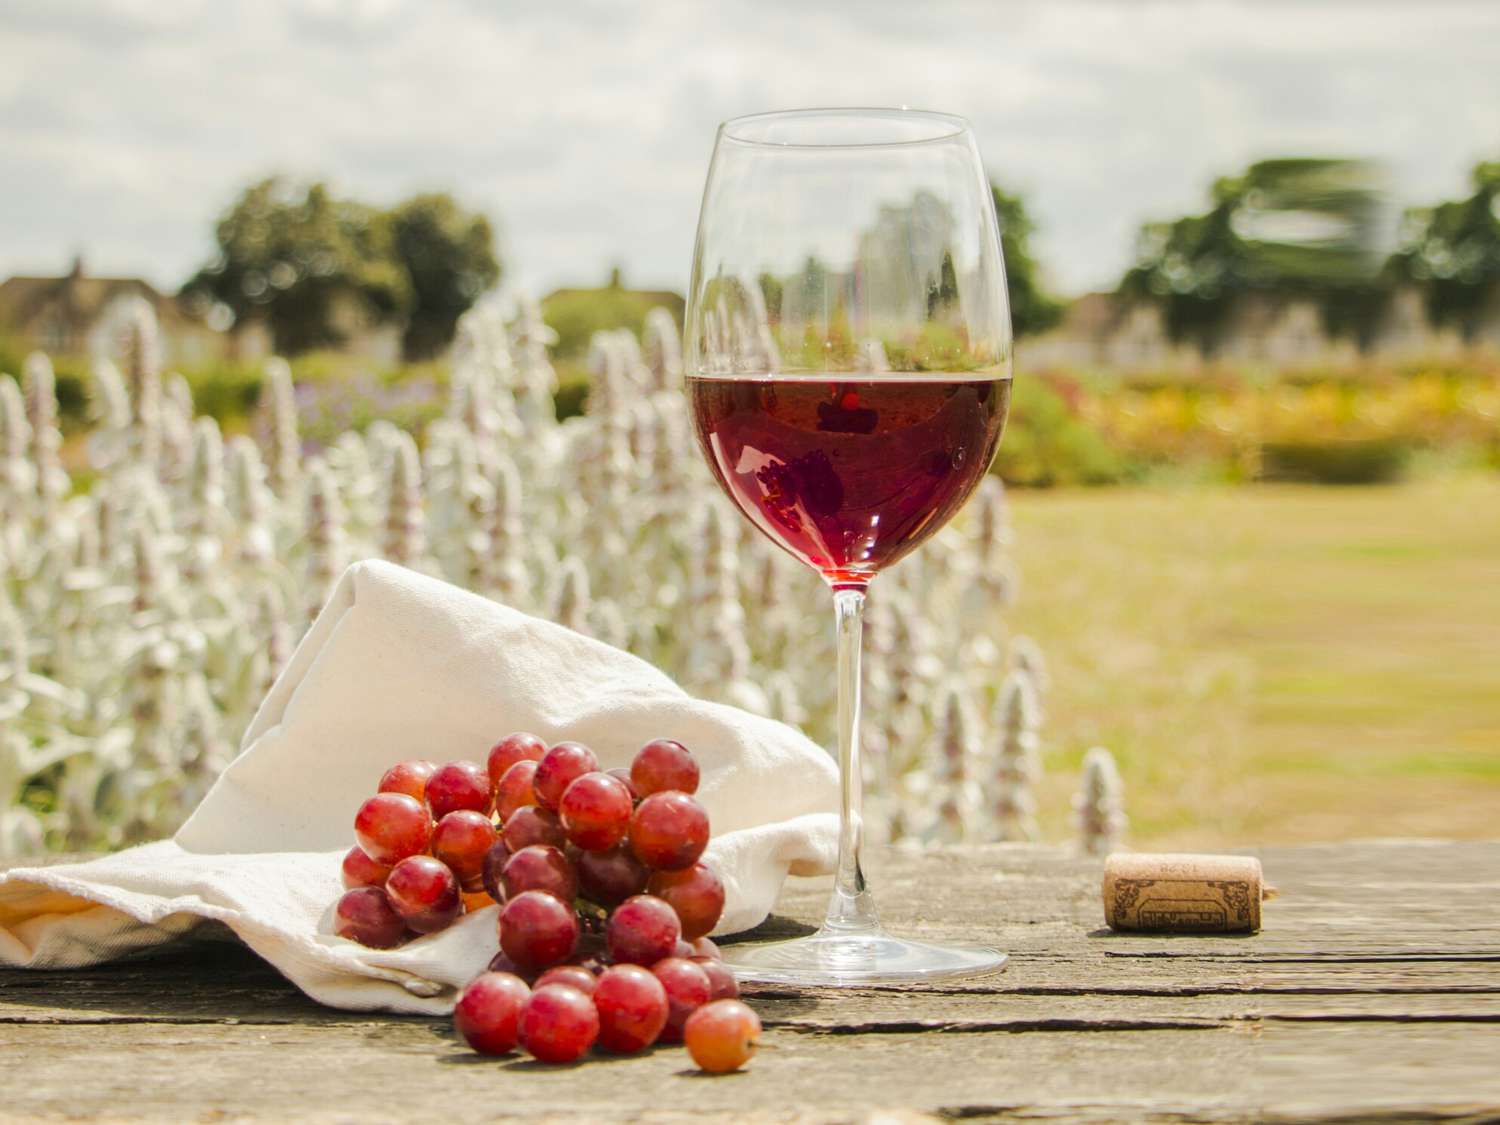 Red Grapes With Wineglass On Table At Field: red wine health benefits